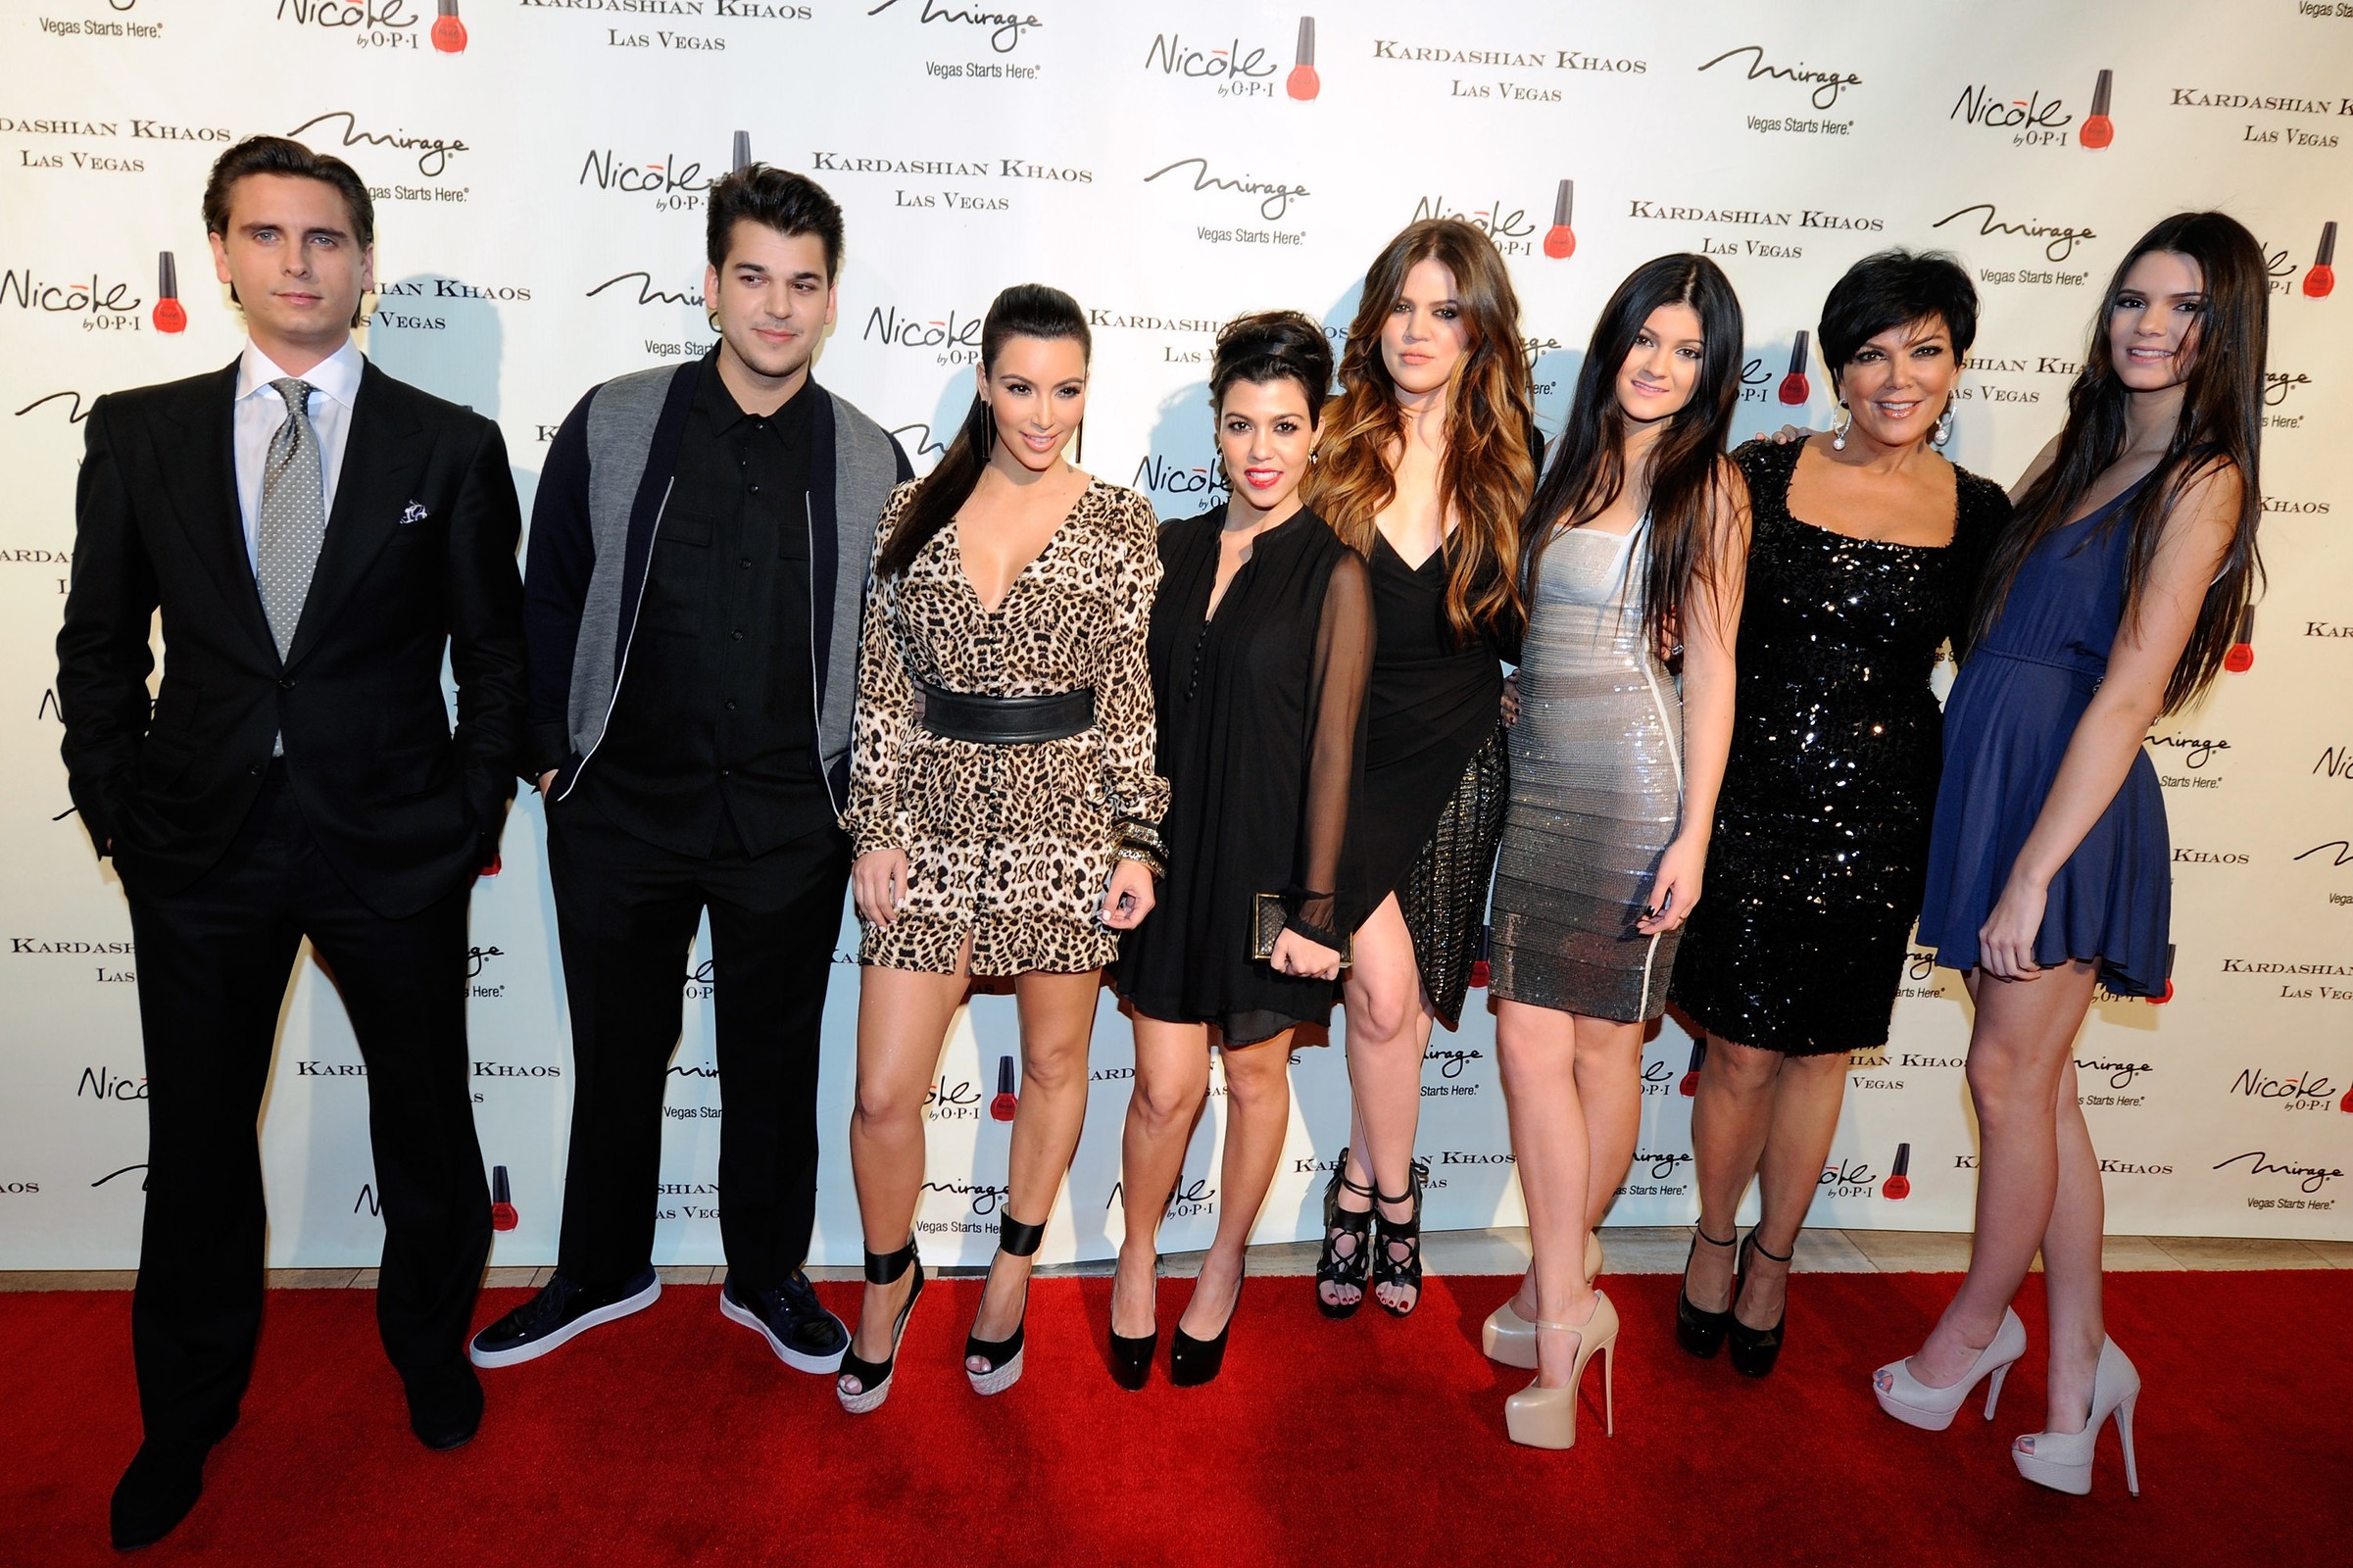 ‘Keeping Up With The Kardashians’ Renewed For 3 More Seasons.  Suicides up 80%.